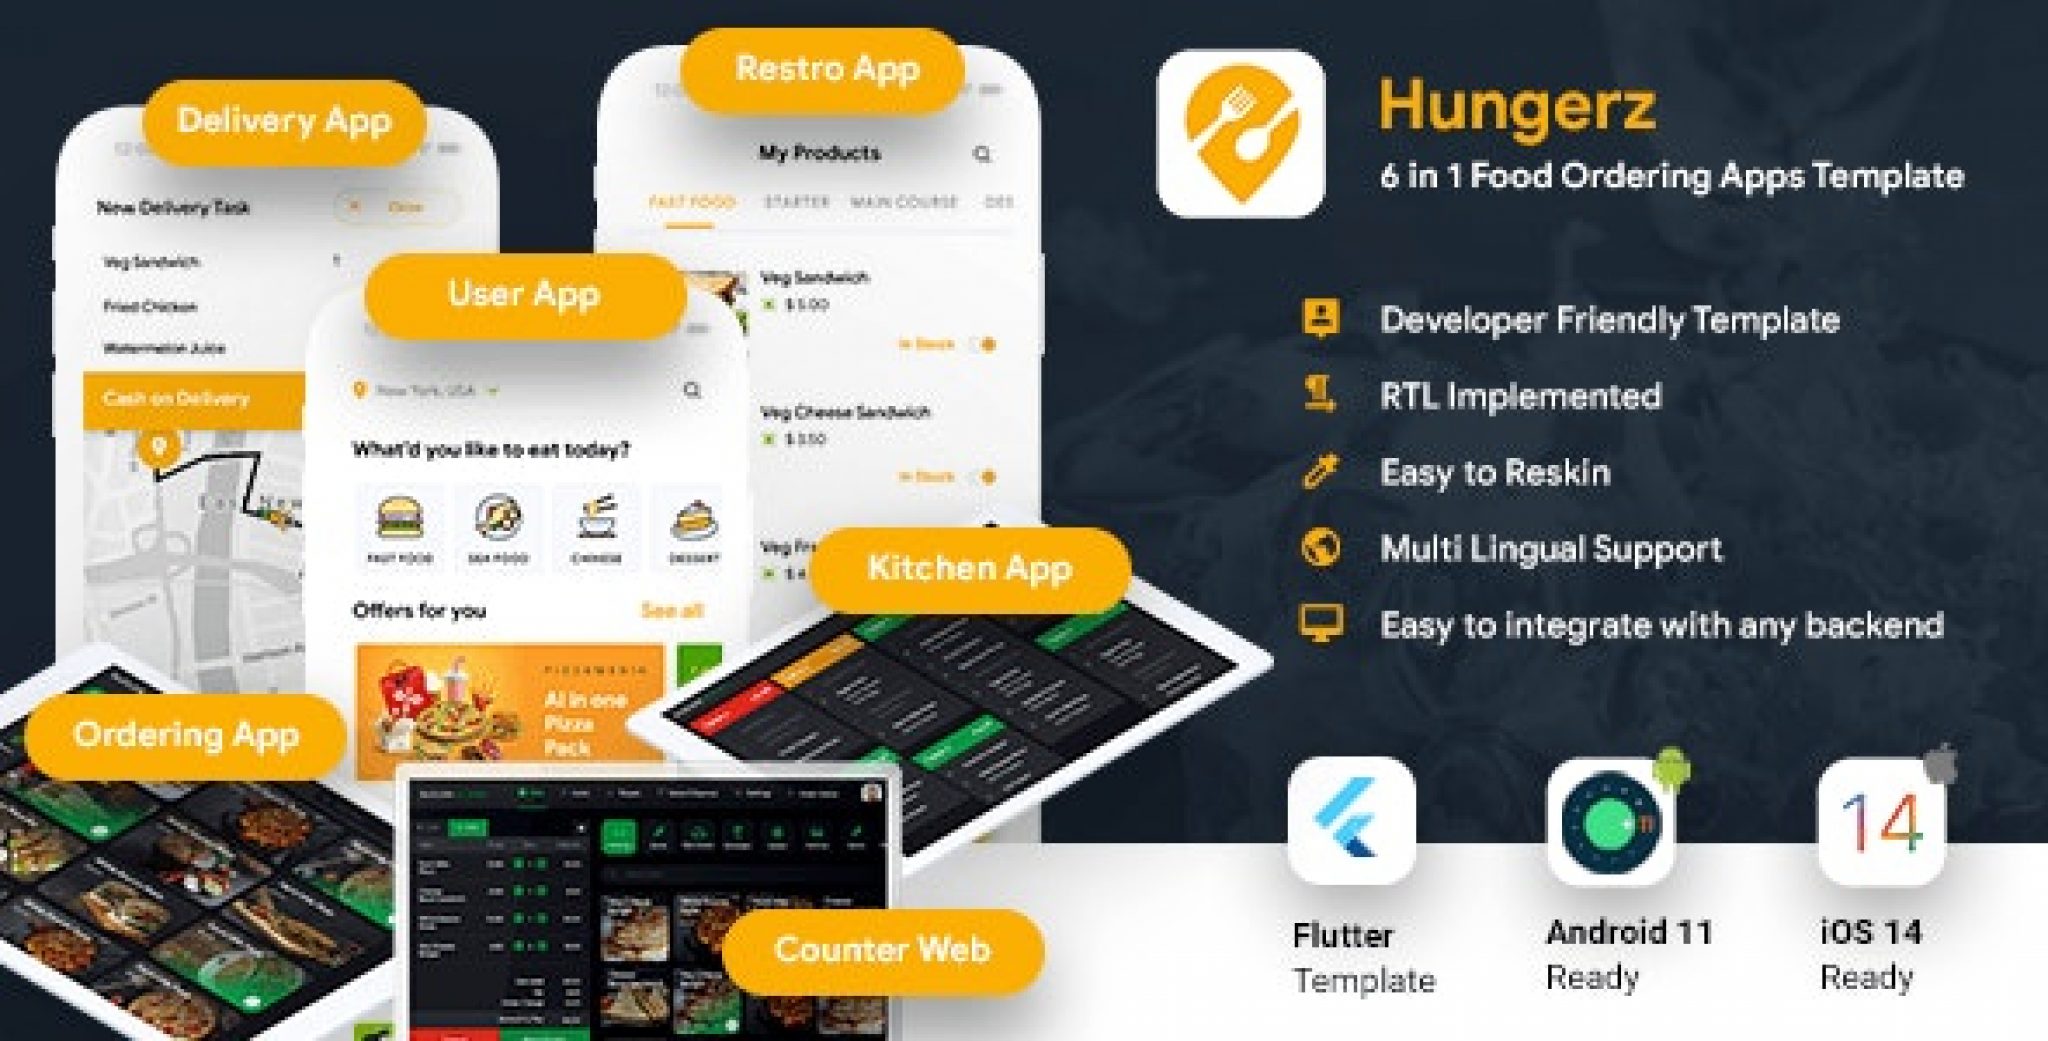 6 in 1 multi Restaurant Food Ordering App|Food Delivery App|Android+iOS